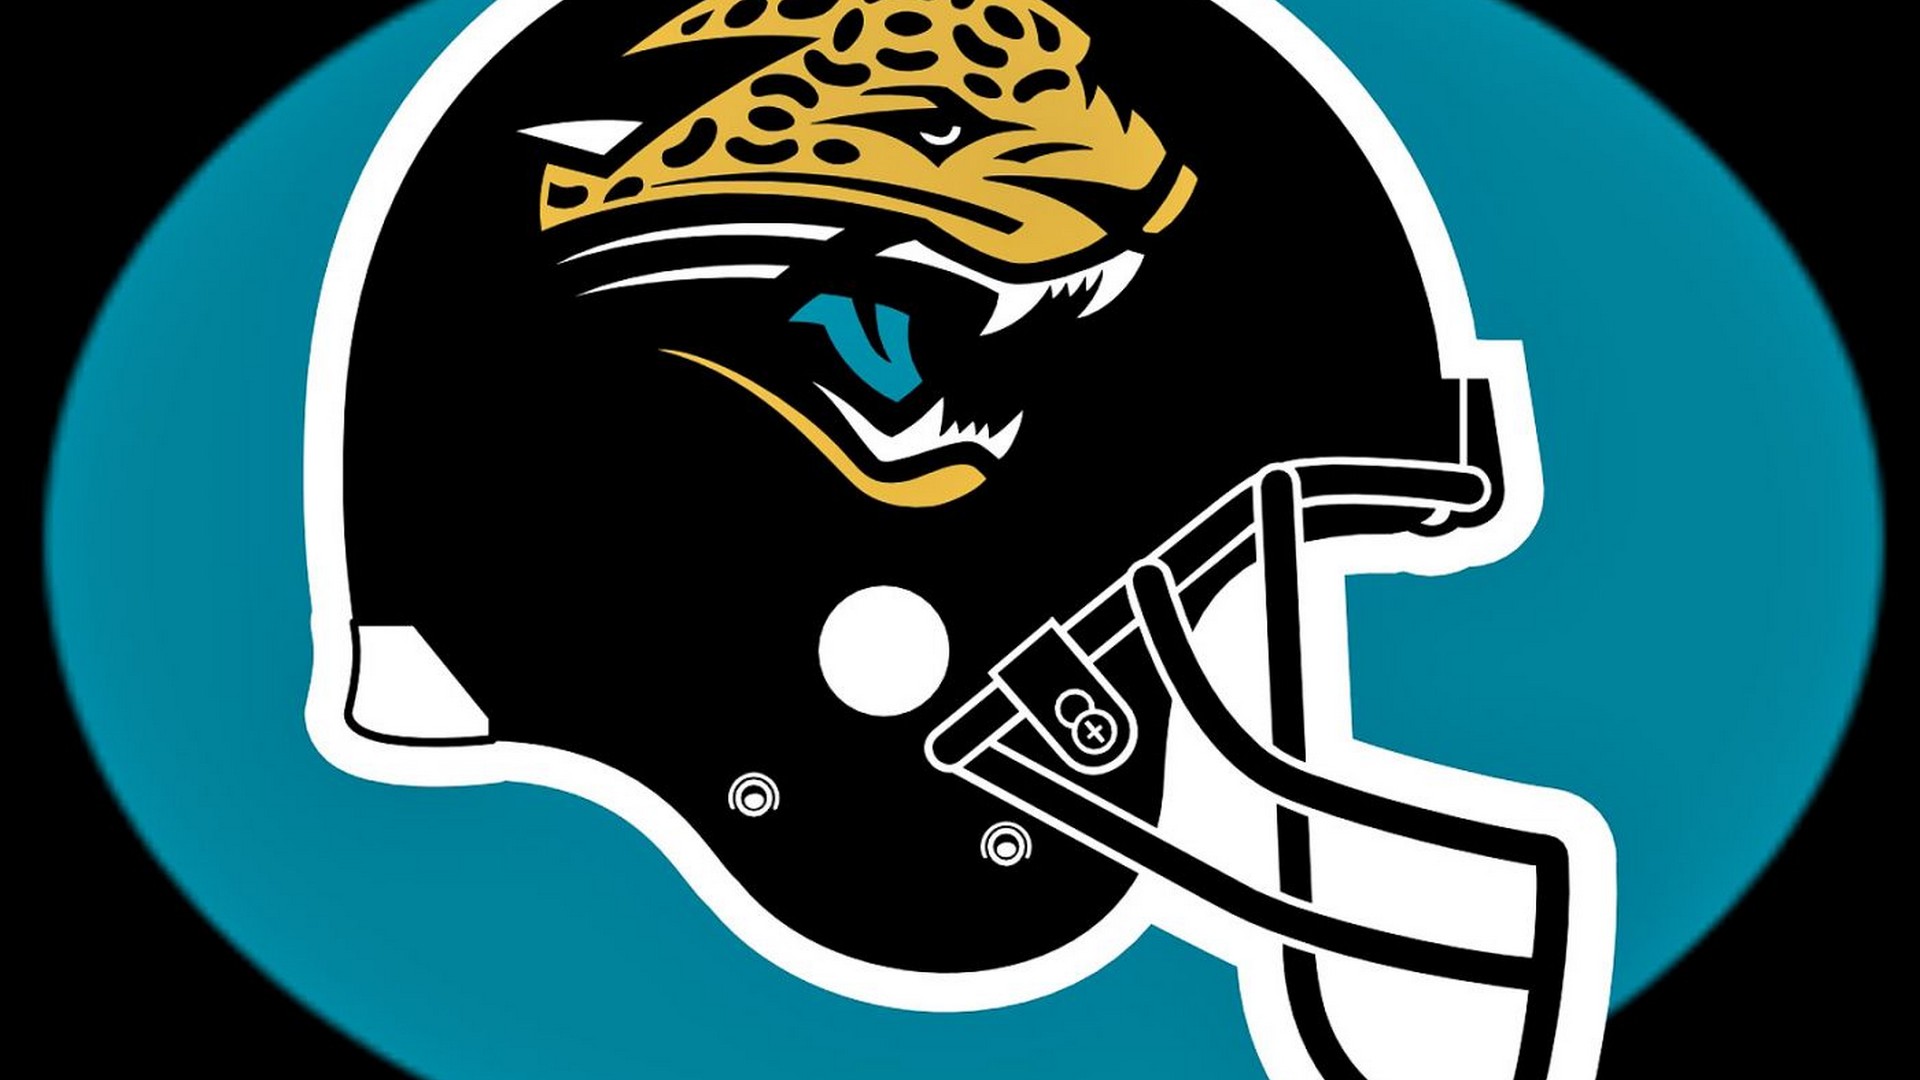 Jacksonville Jaguars Mac Wallpaper With high-resolution 1920X1080 pixel. Download and set as wallpaper for Desktop Computer, Apple iPhone X, XS Max, XR, 8, 7, 6, SE, iPad, Android